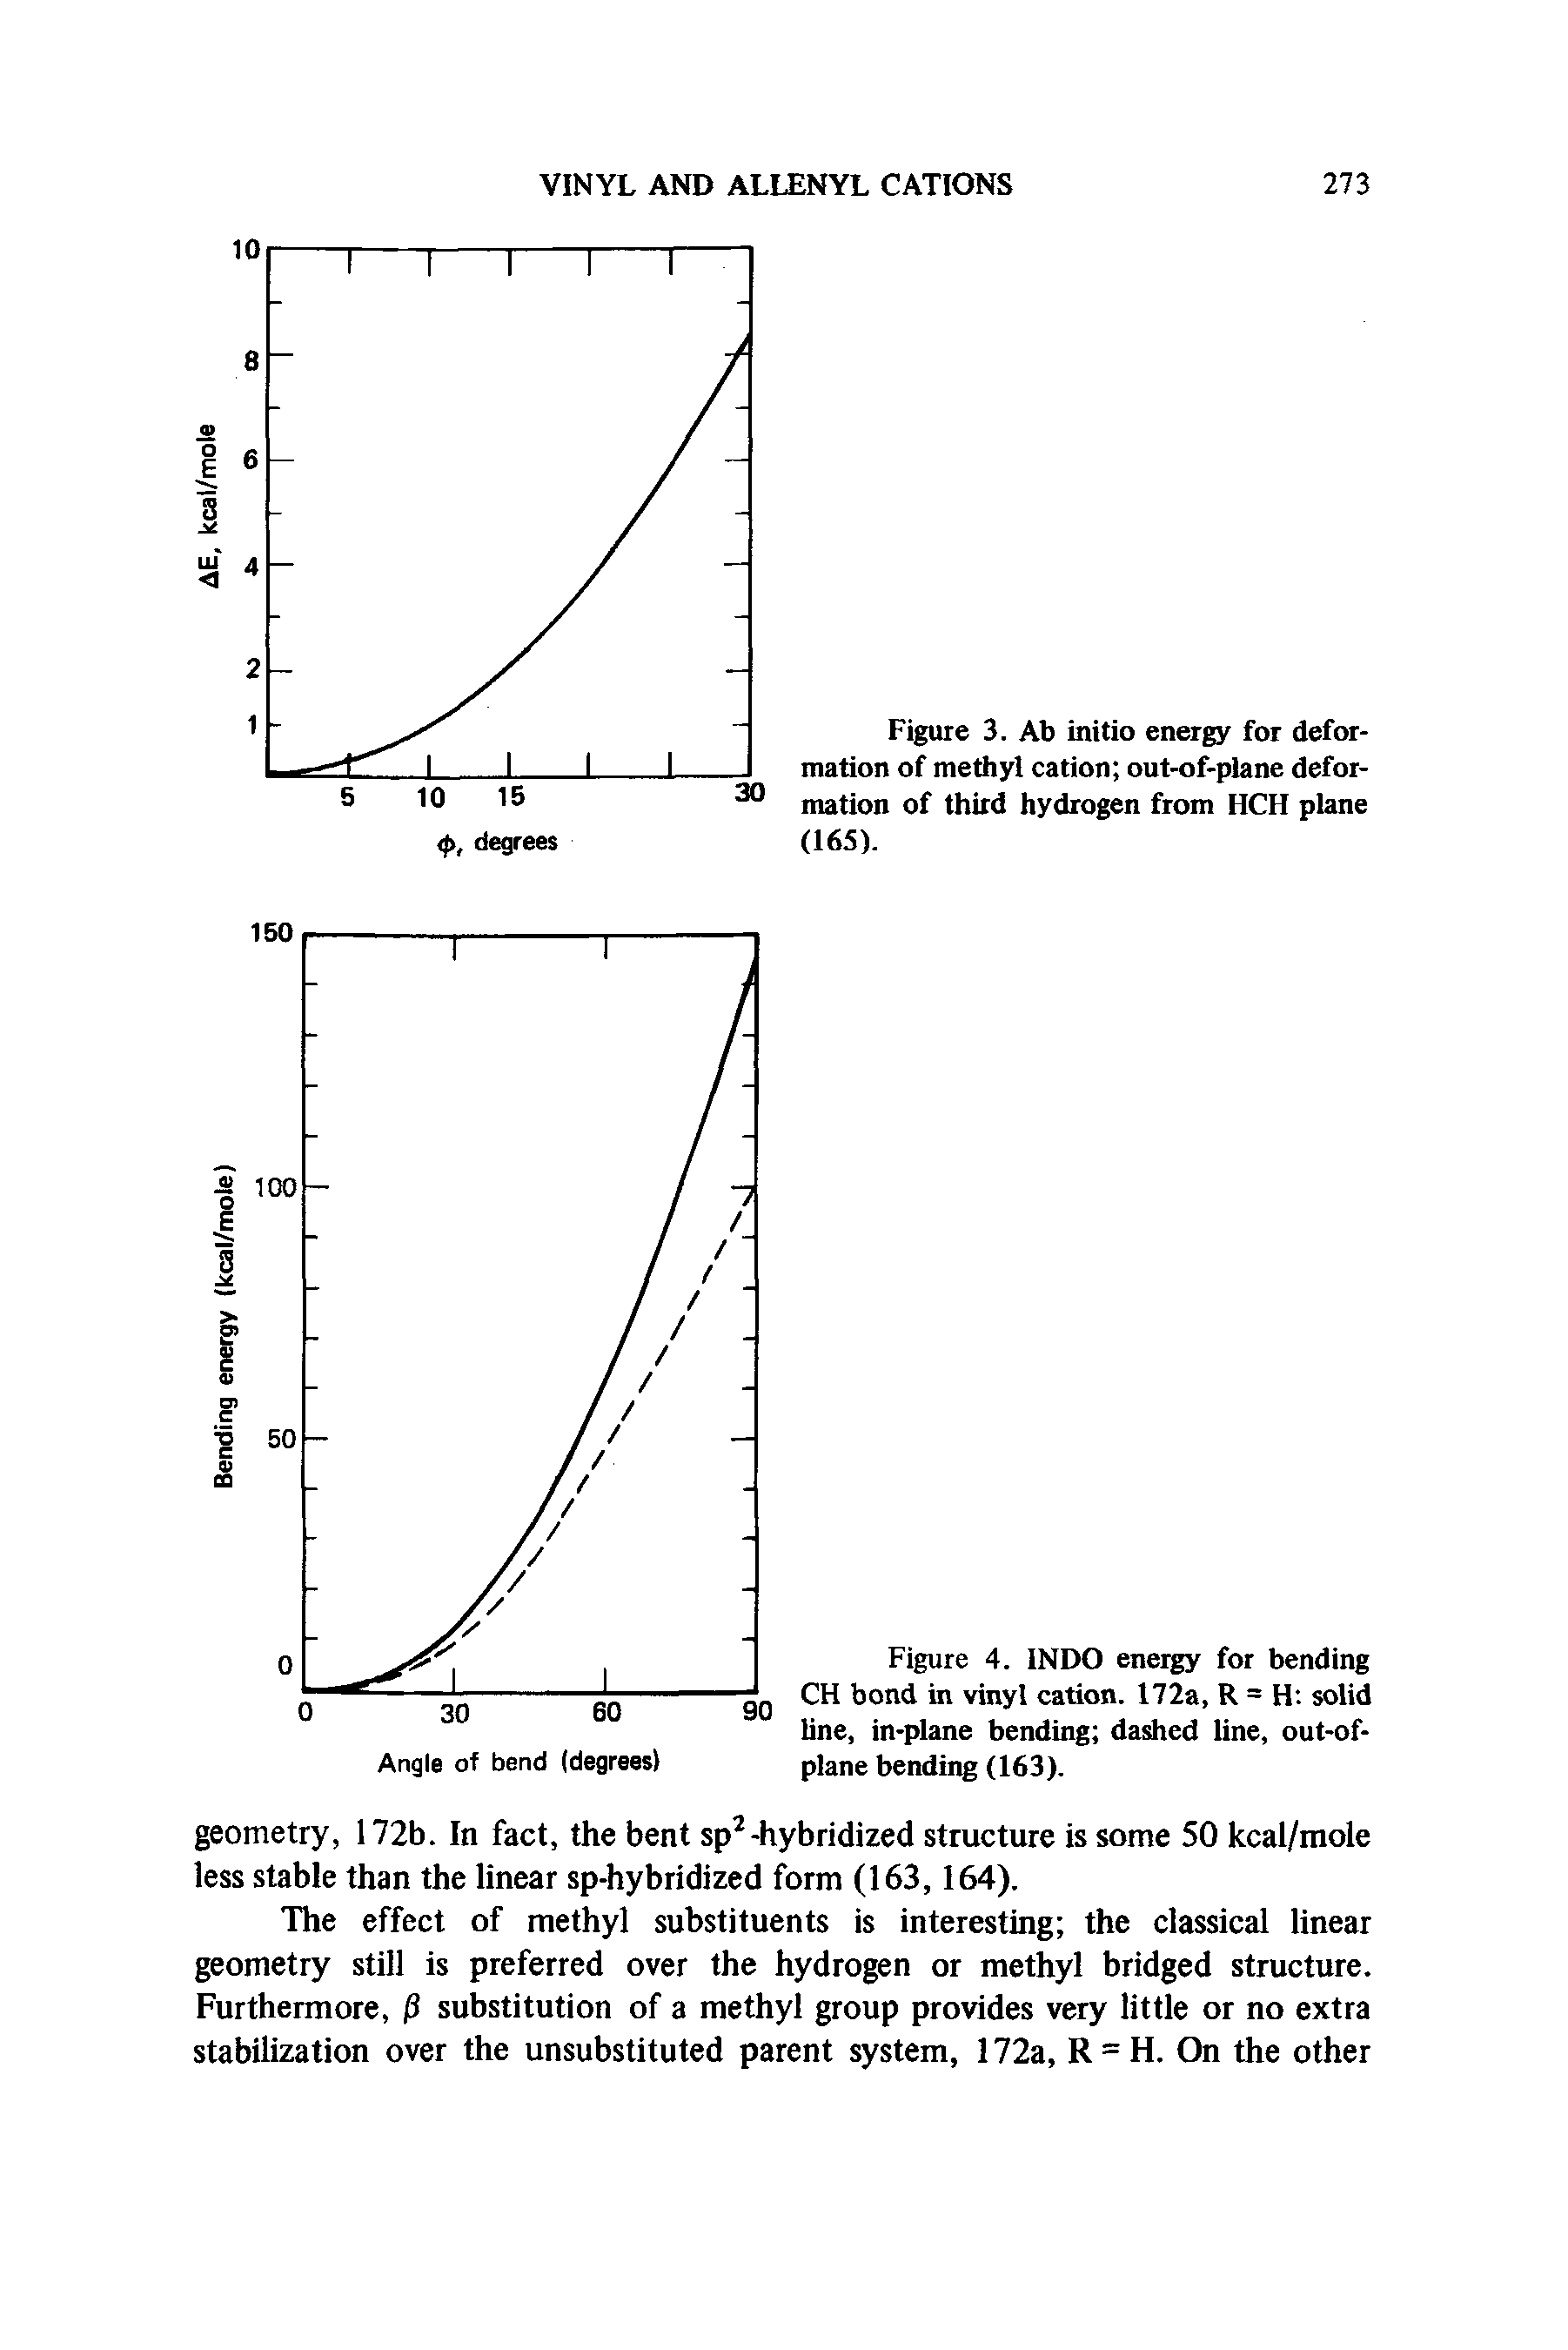 Figure 3. Ab initio energy for deformation of methyl cation out-of-plane deformation of third hydrogen from HCH plane (165).